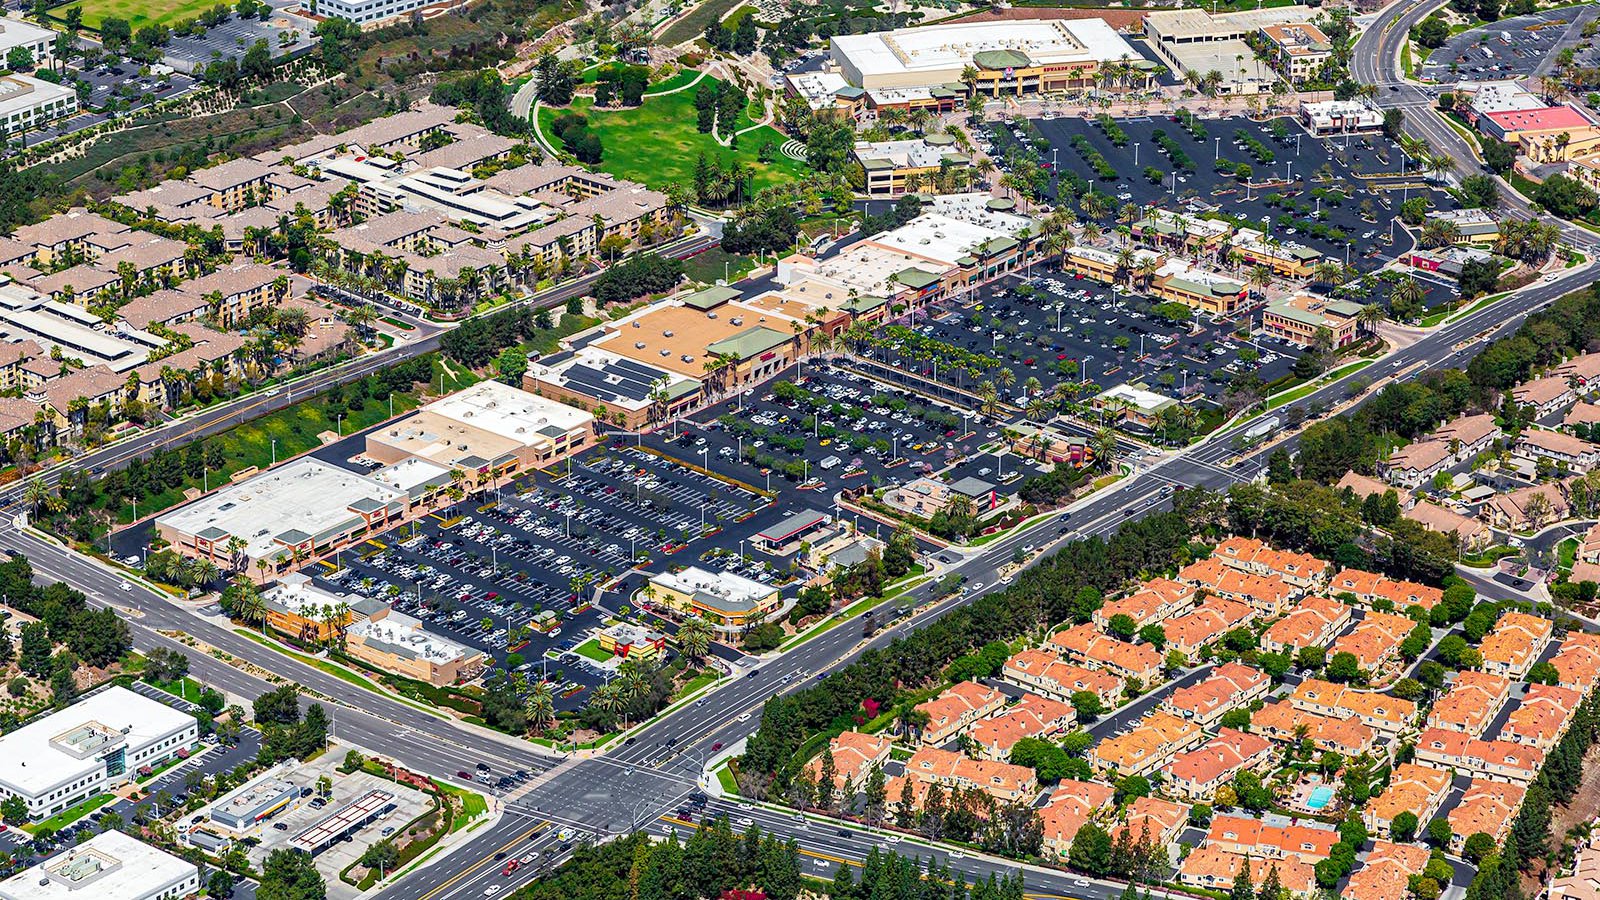 Commercial Real Estate photo of the Aliso Viejo Towne Center Shopping Center